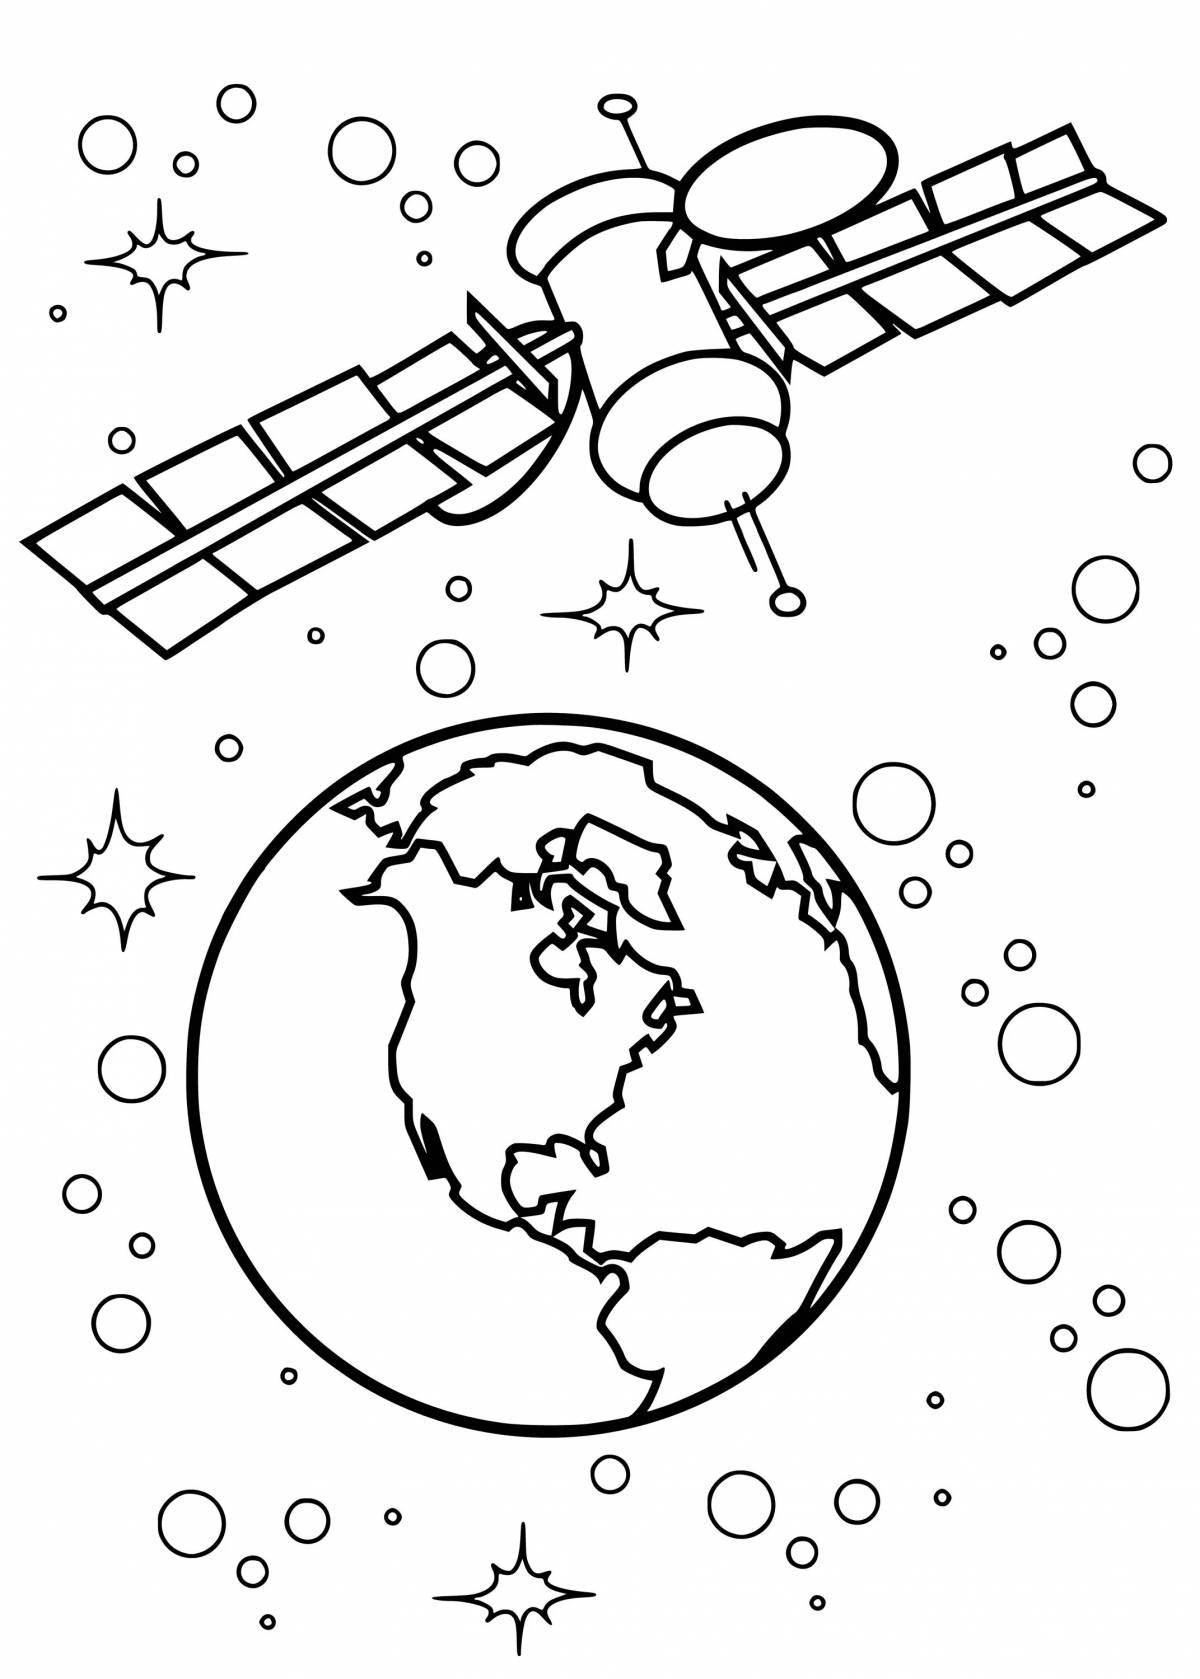 Majestic space station coloring page